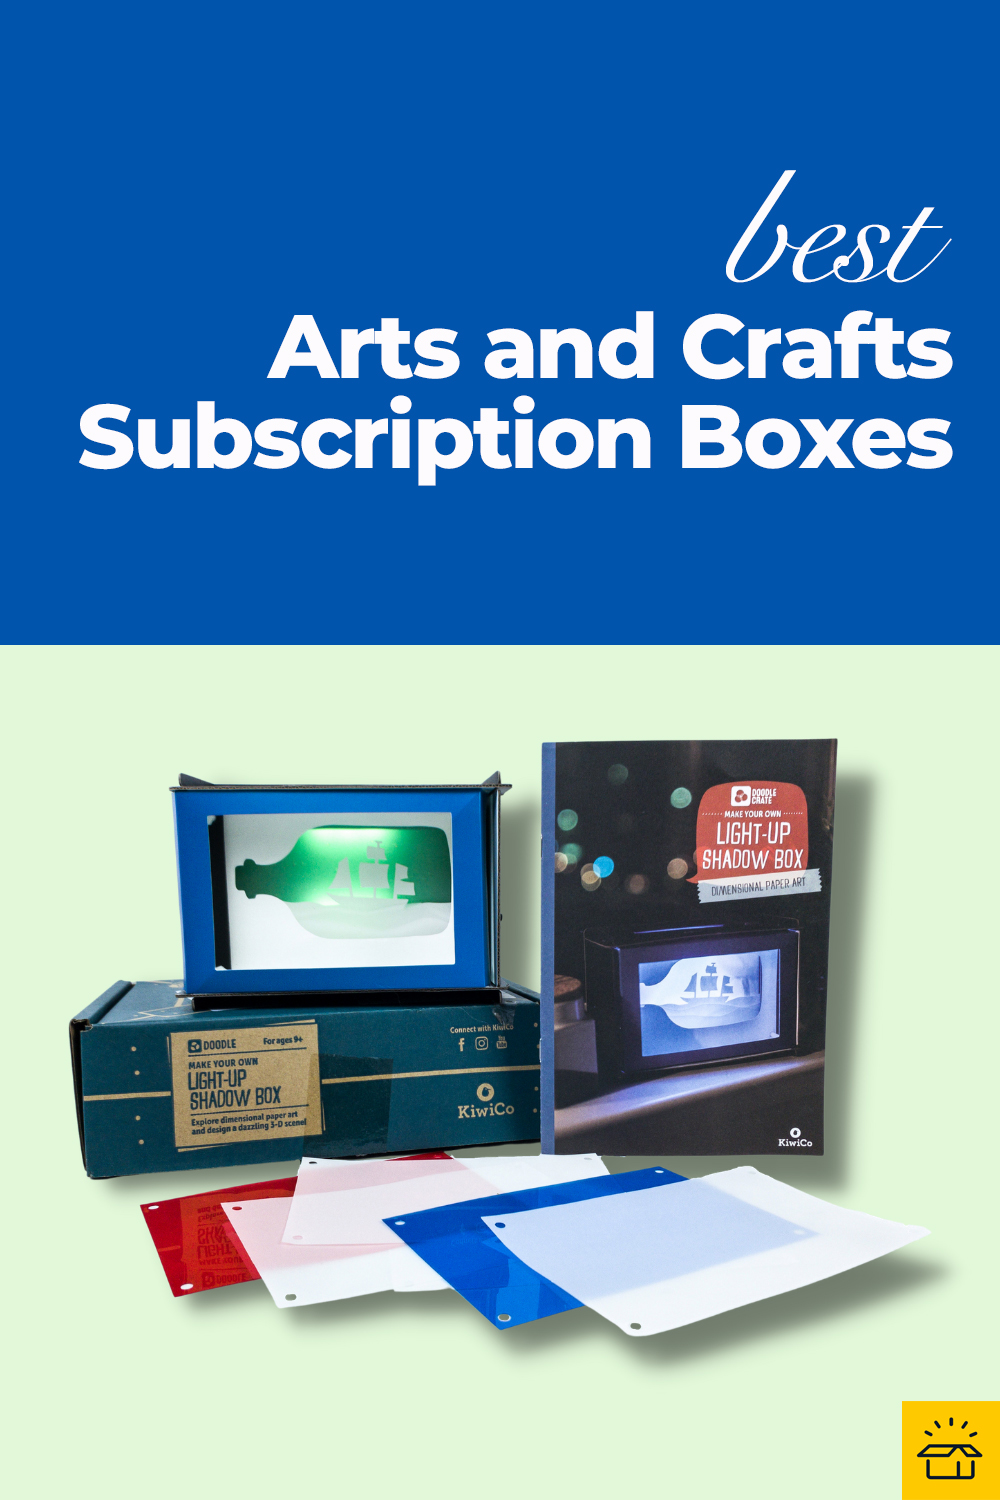 This subscription is perfect for arts-and-crafts lovers - Boing Boing